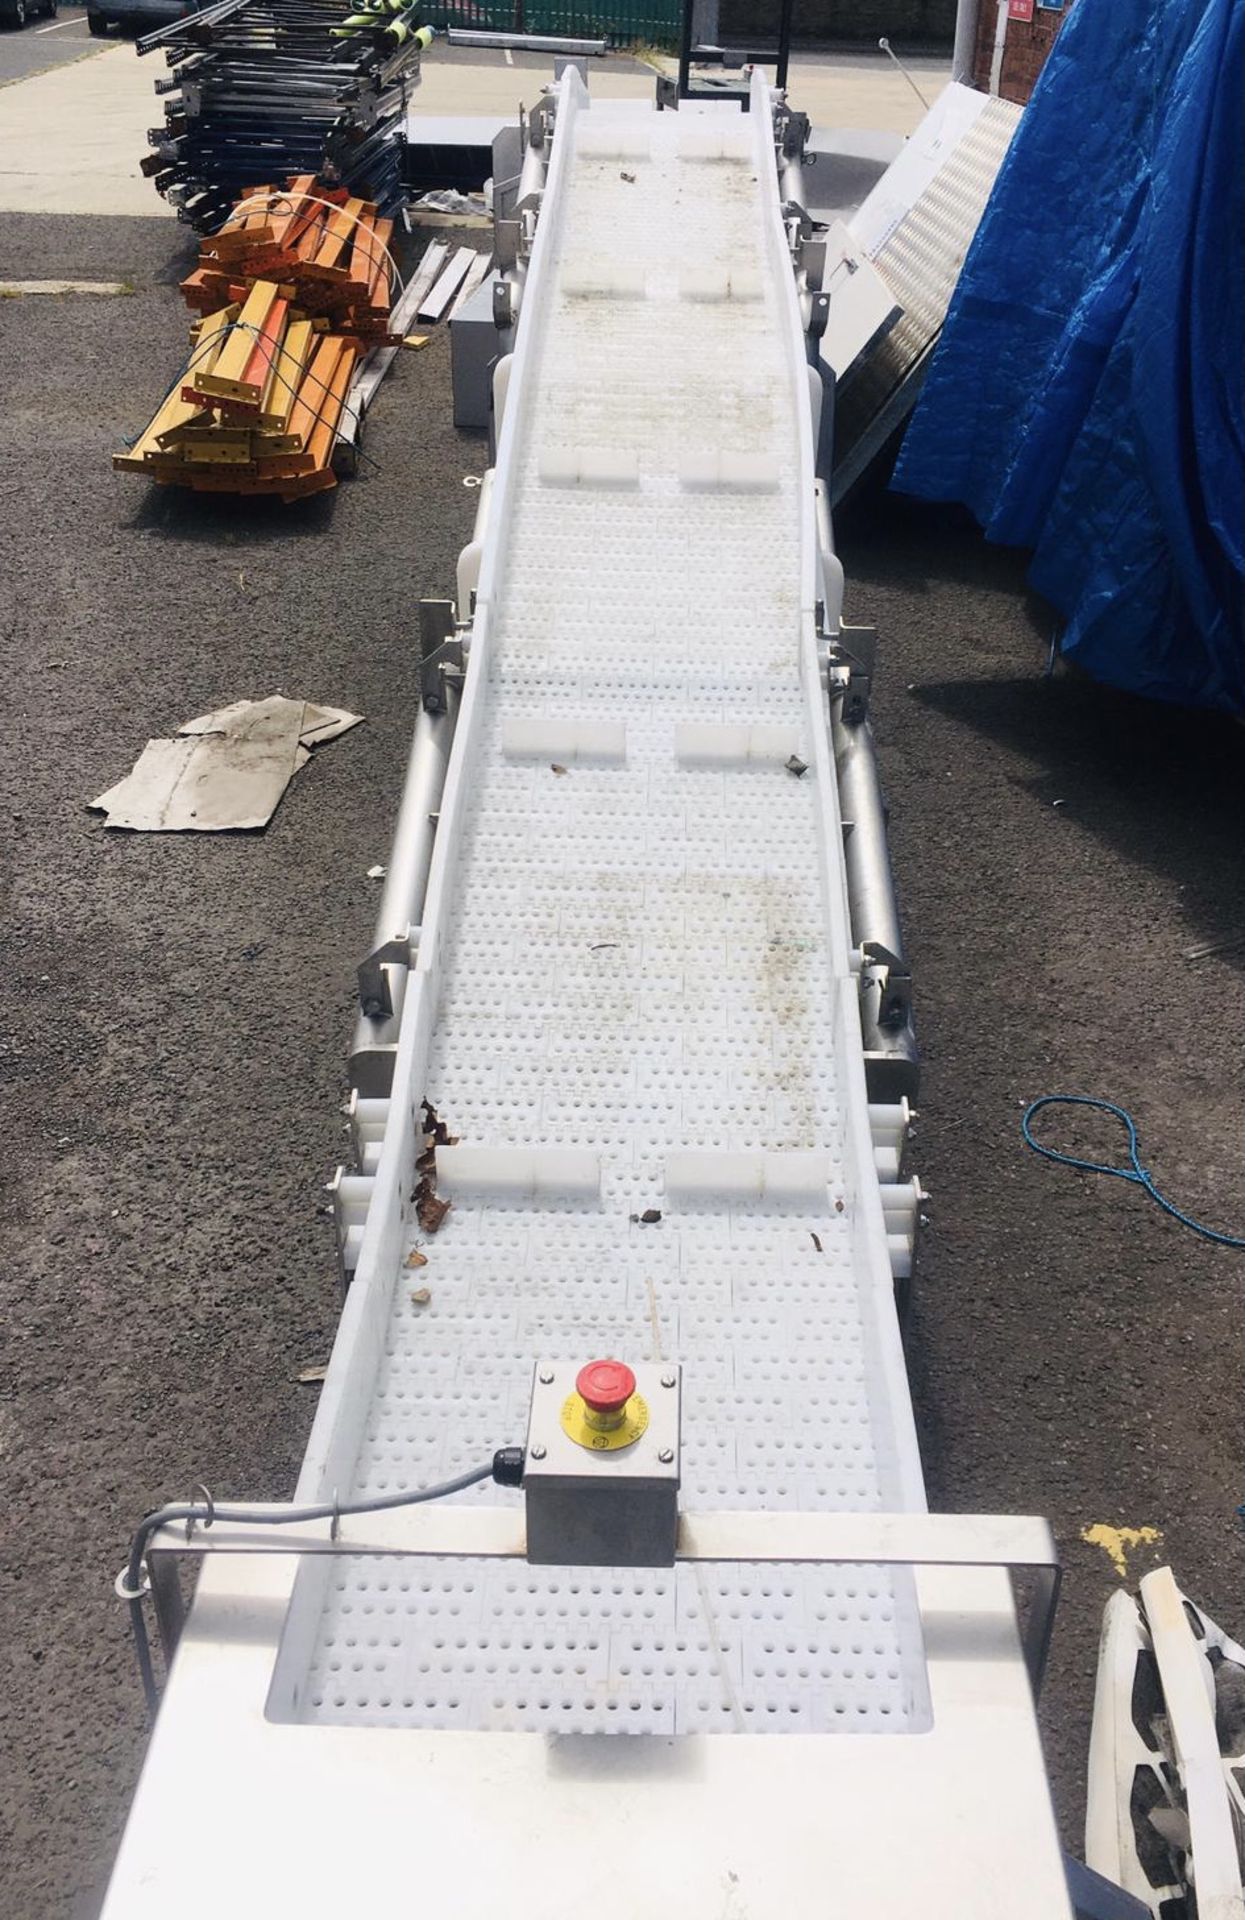 SF stainless steel mobile powered Conveyor, 5600mm - Image 3 of 7